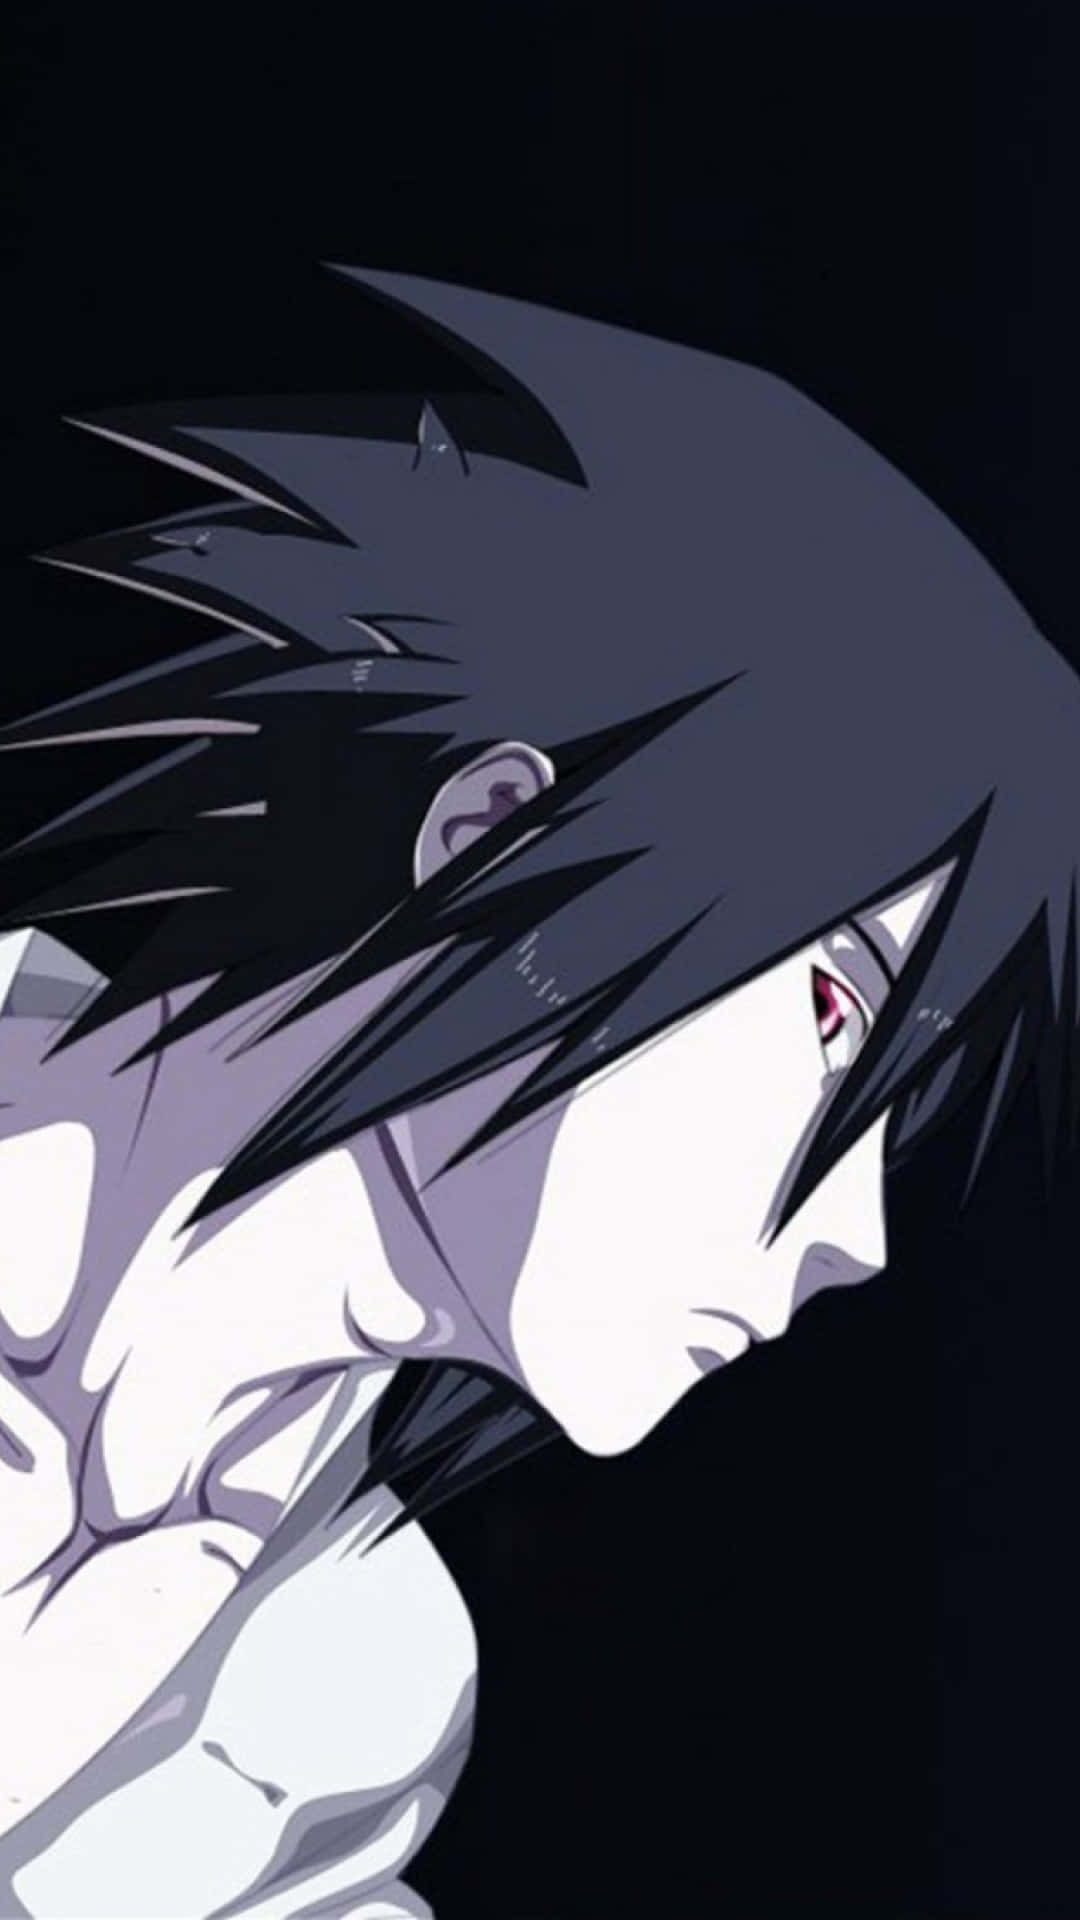 Watch the universe unfold with Iphone Uchiha Wallpaper